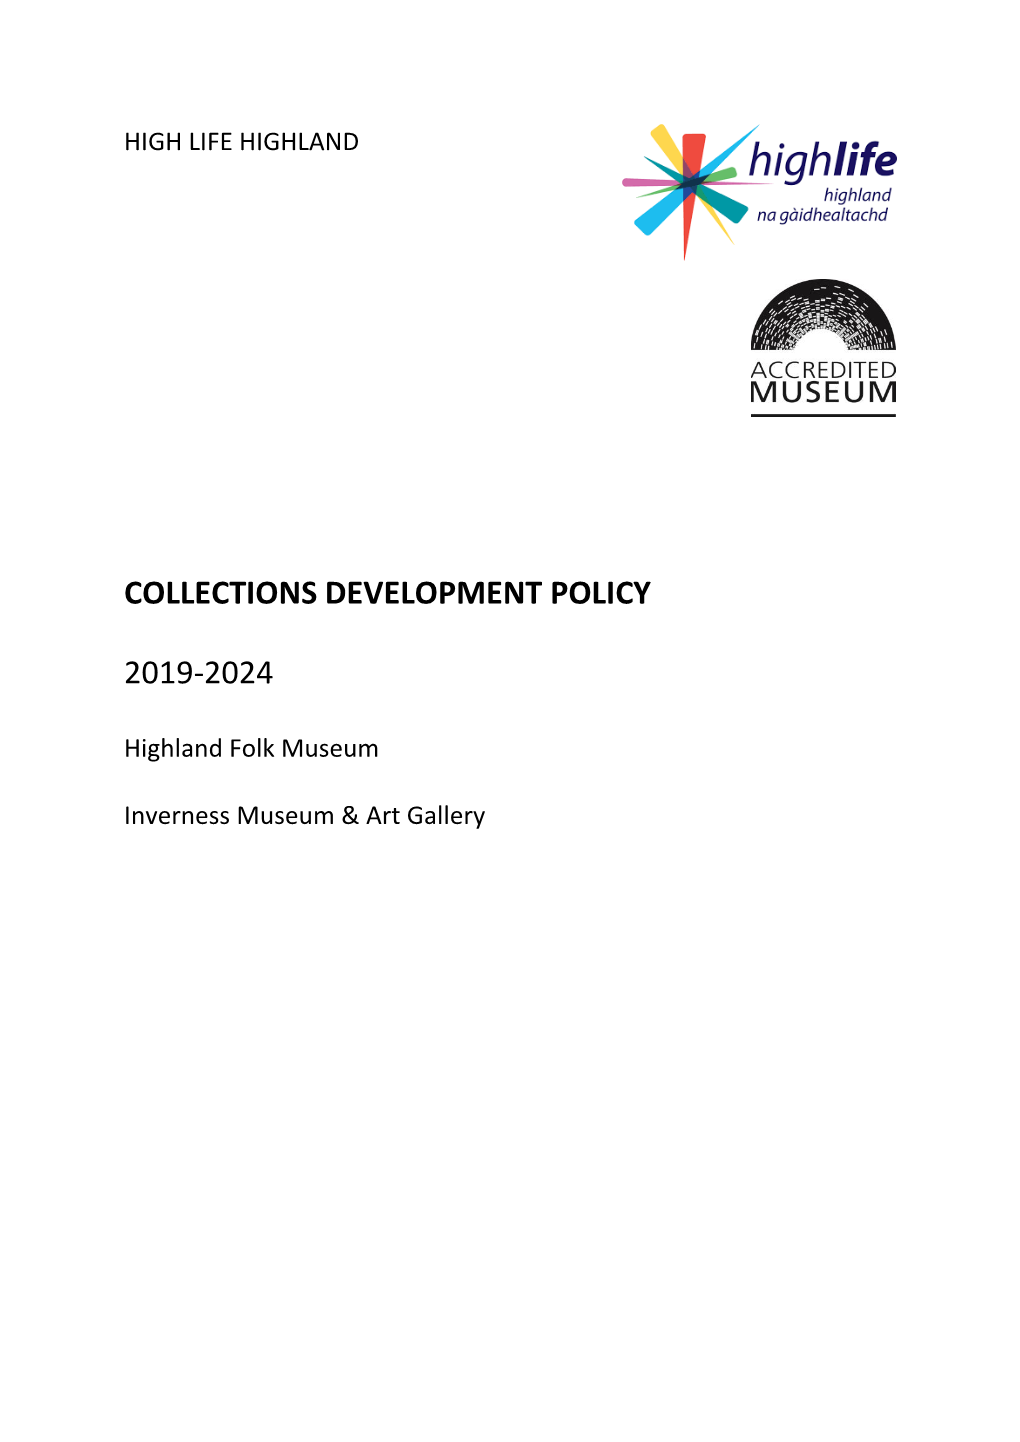 Collections Development Policy 2019-2024